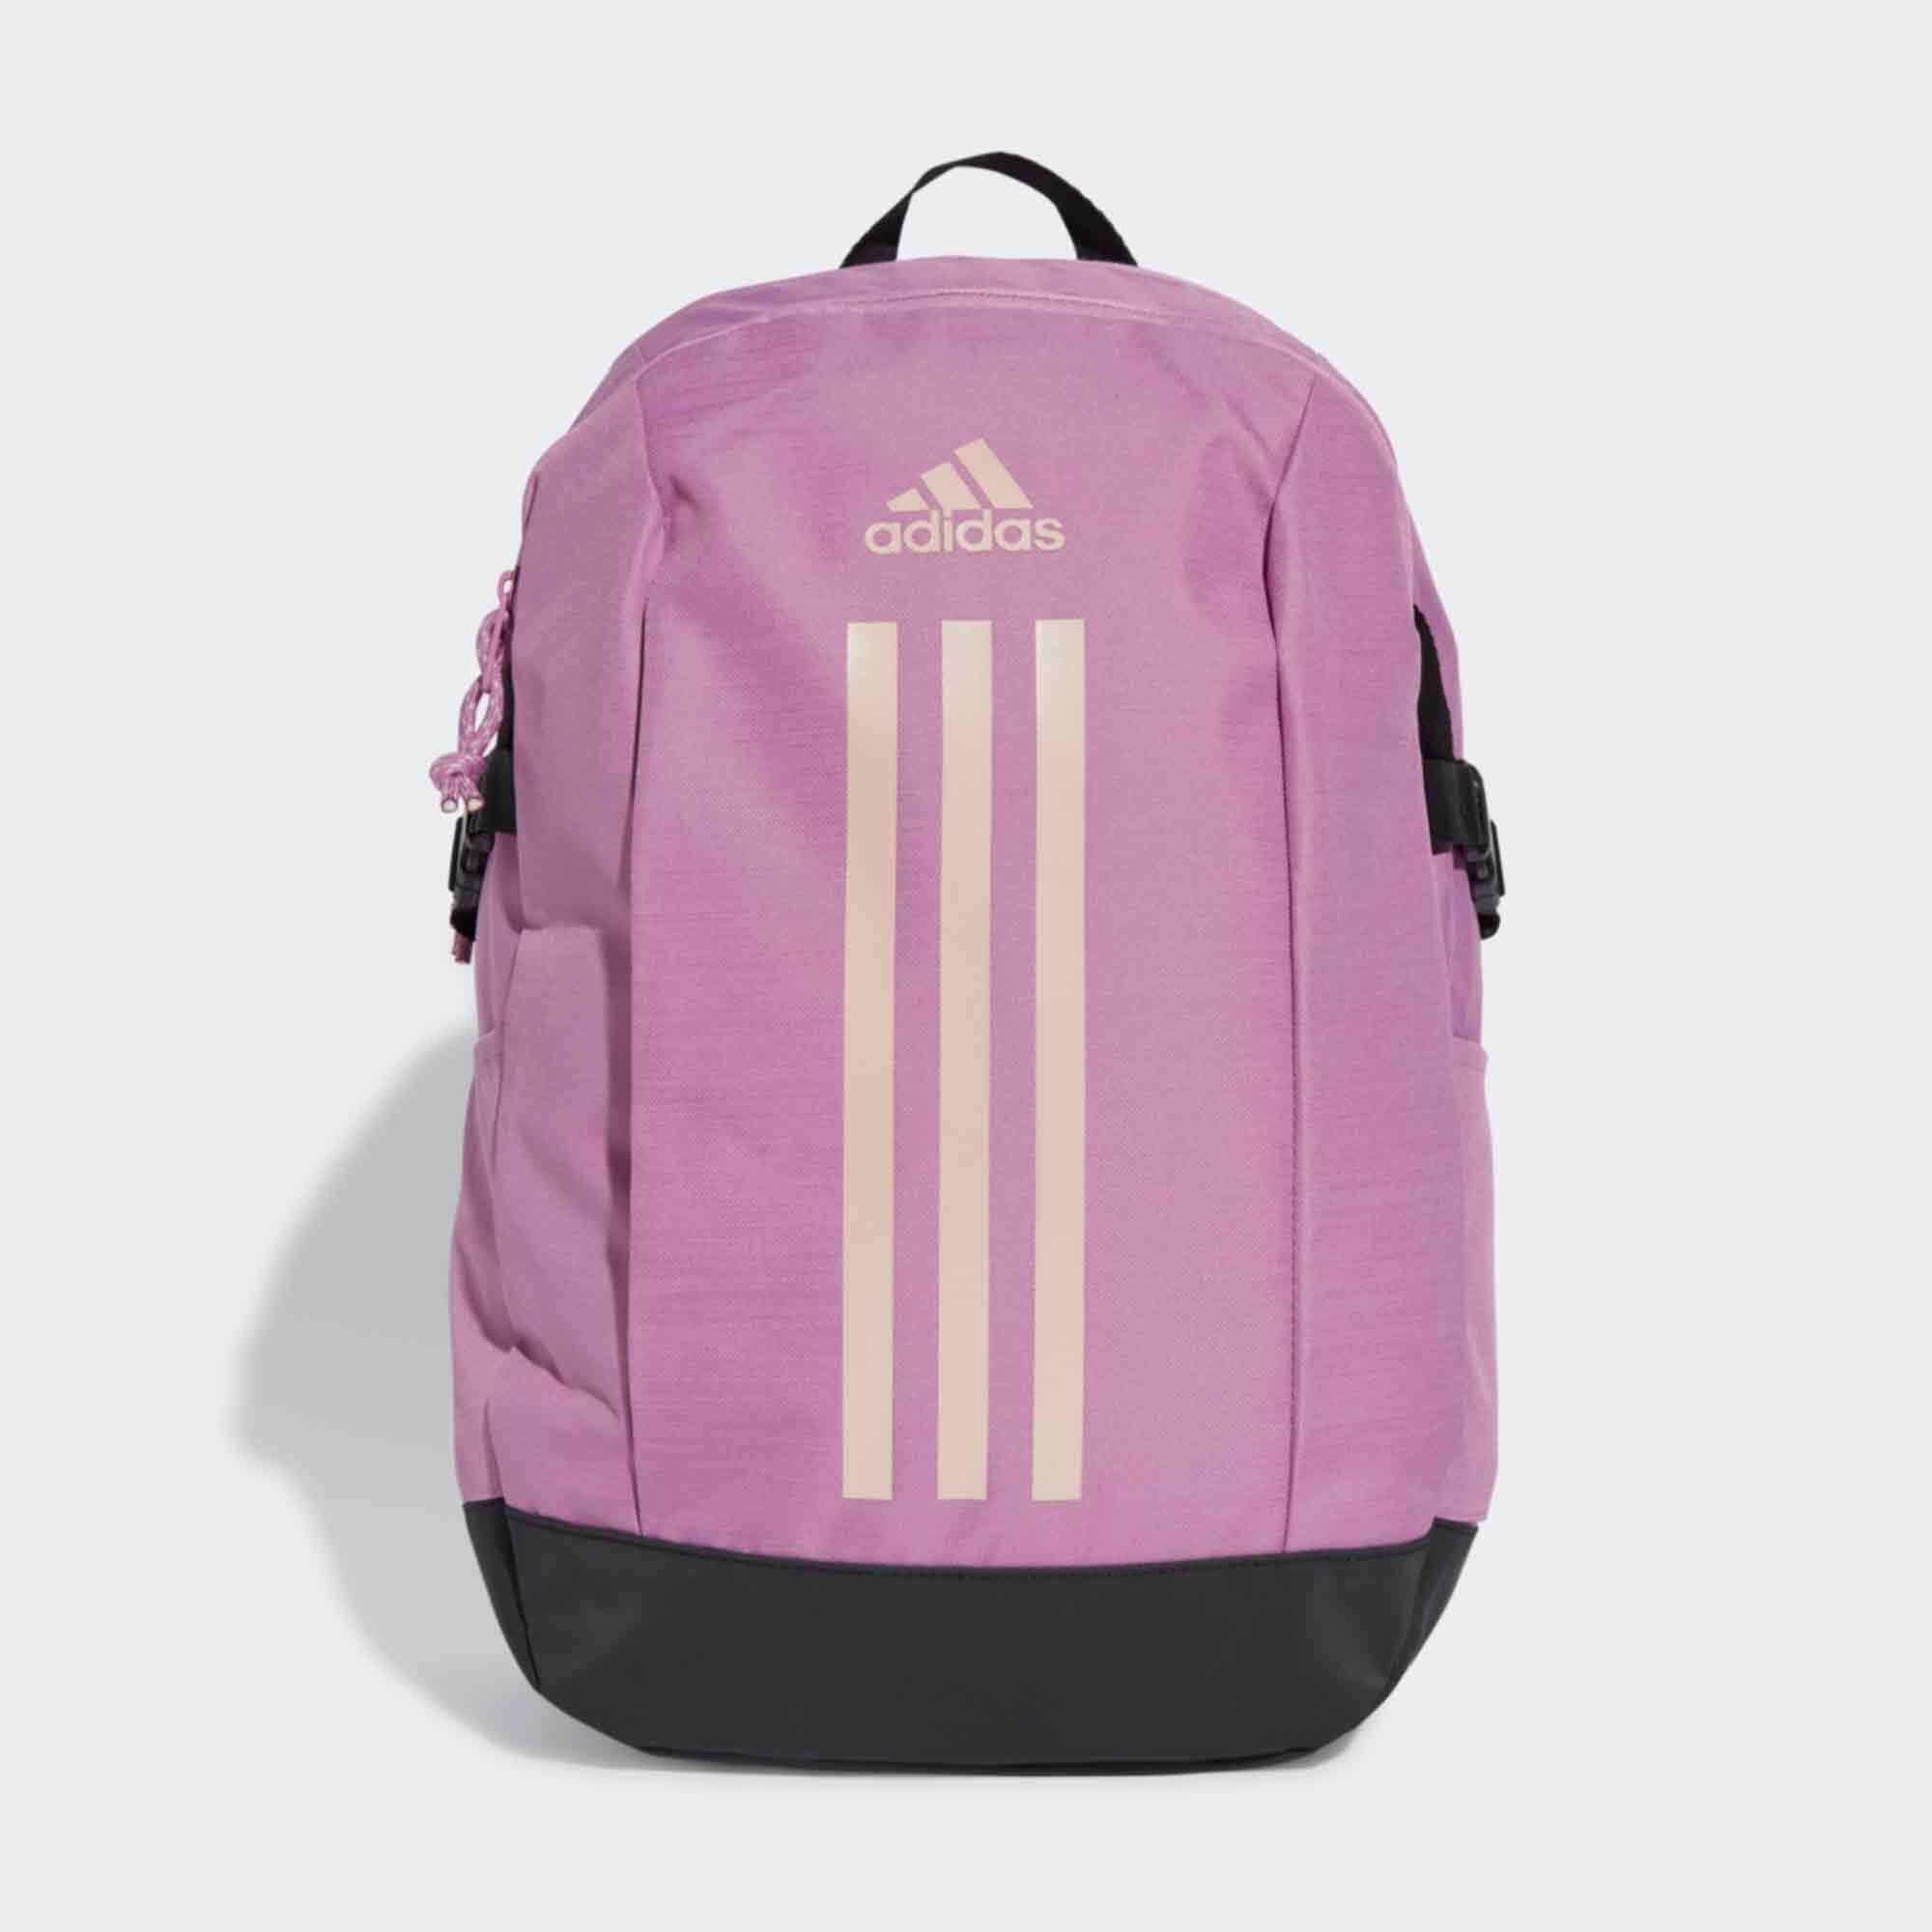 adidas Power VII Backpack Pink/Purple 26 Litres